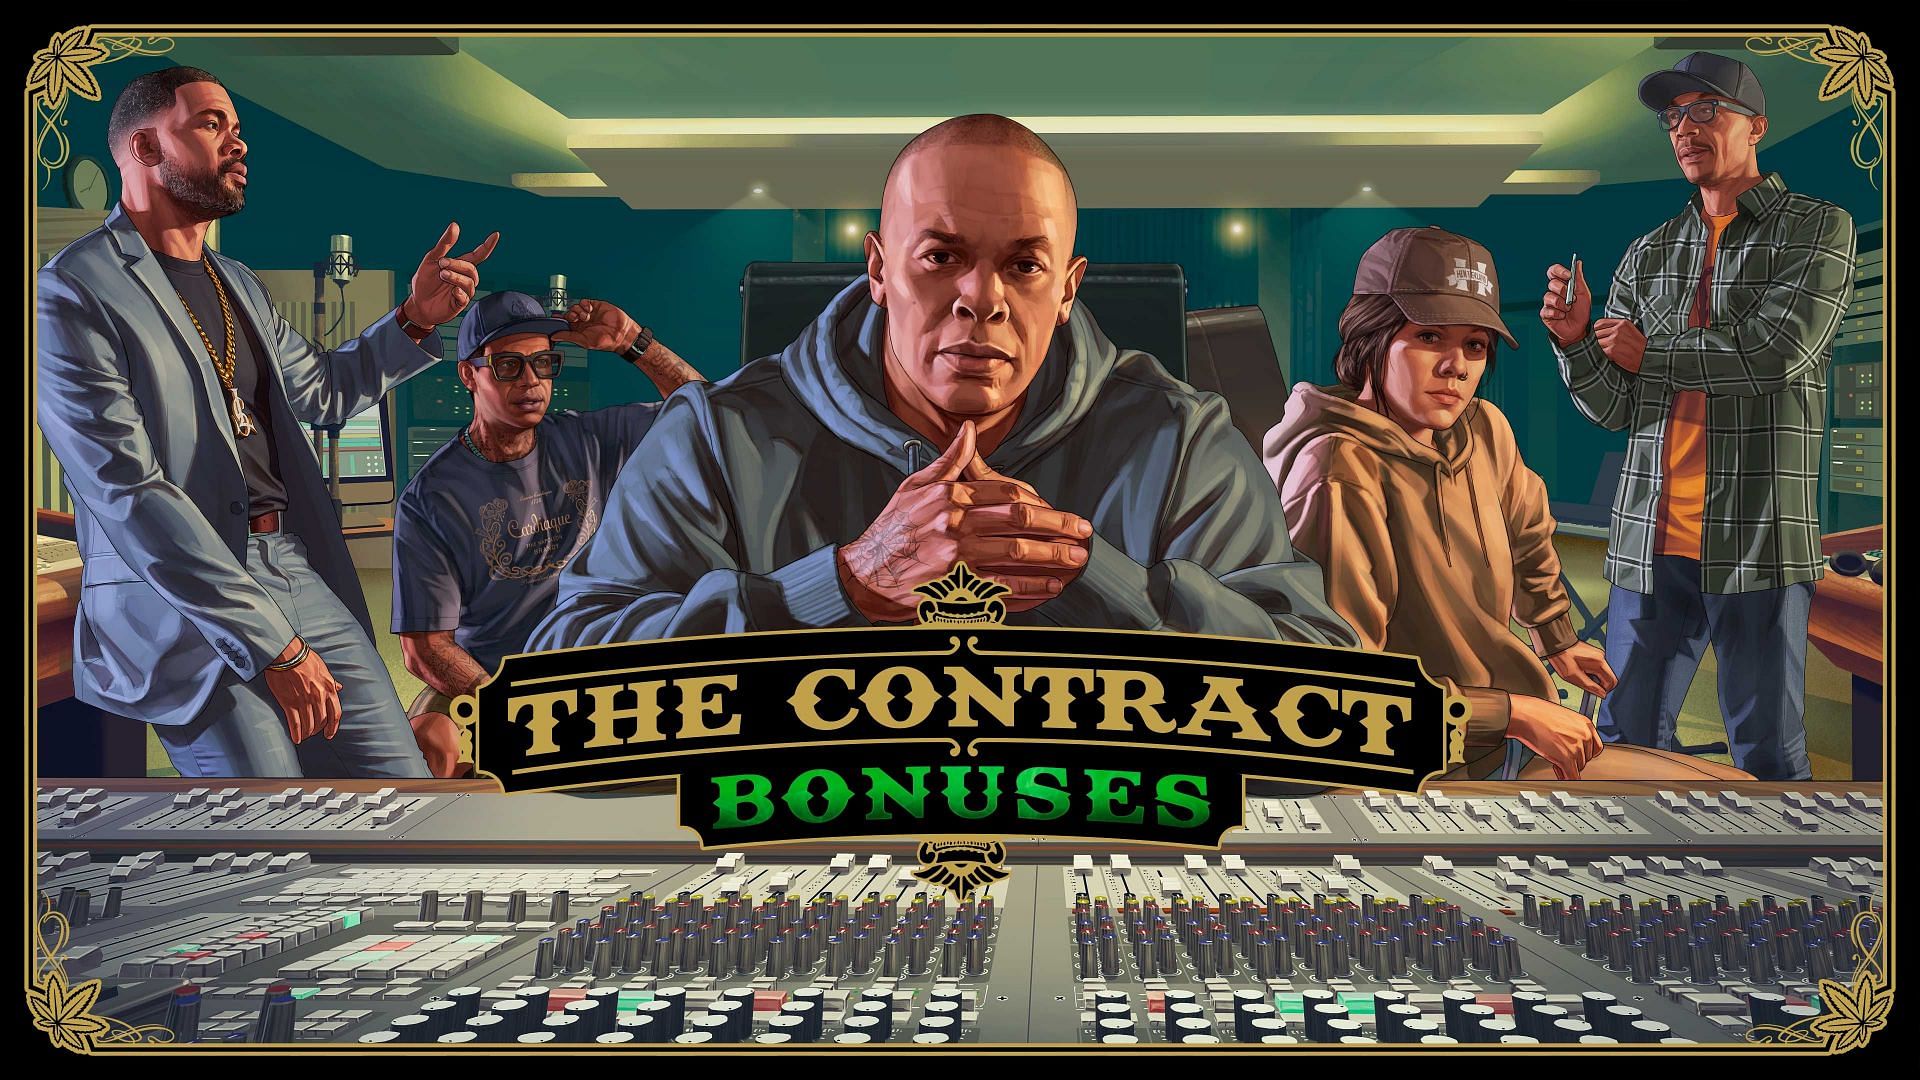 Dr. Dre contracts are offering double rewards in GTA Online (image via Rockstar Games)